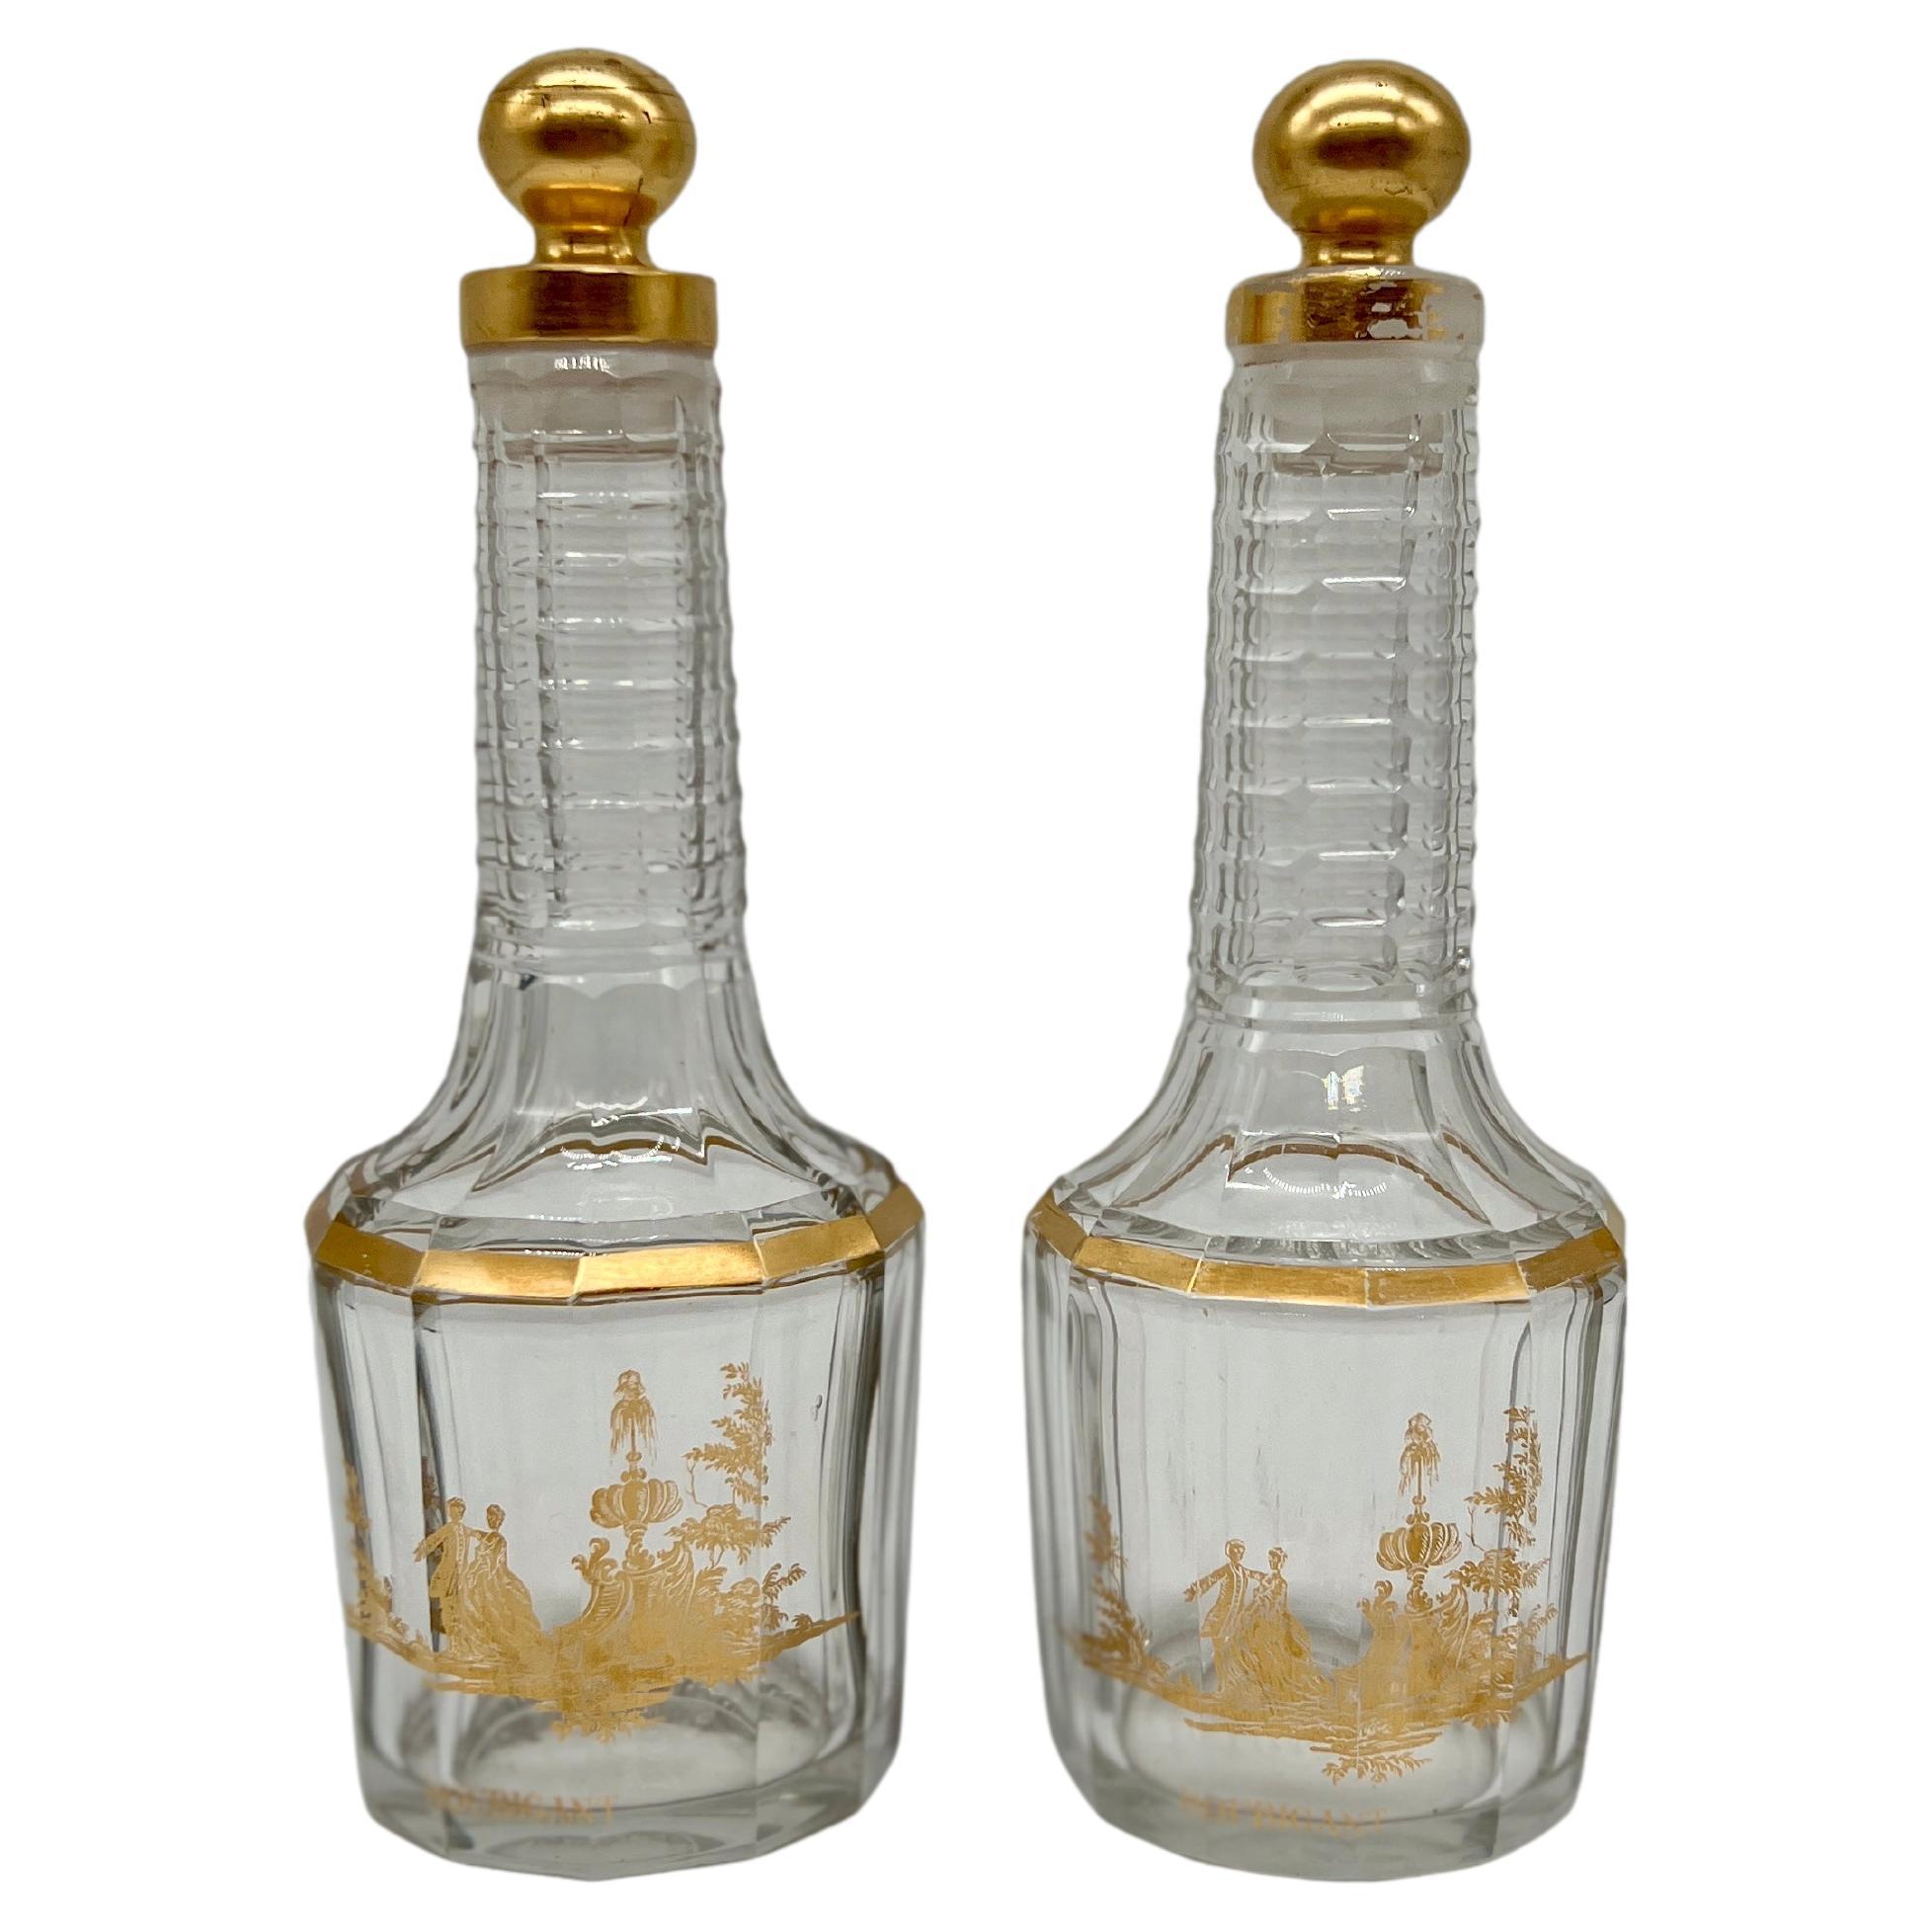 Pair, Antique French Baccarat Houbigant Gilt Crystal Perfume Bottles C. 1920 For Sale